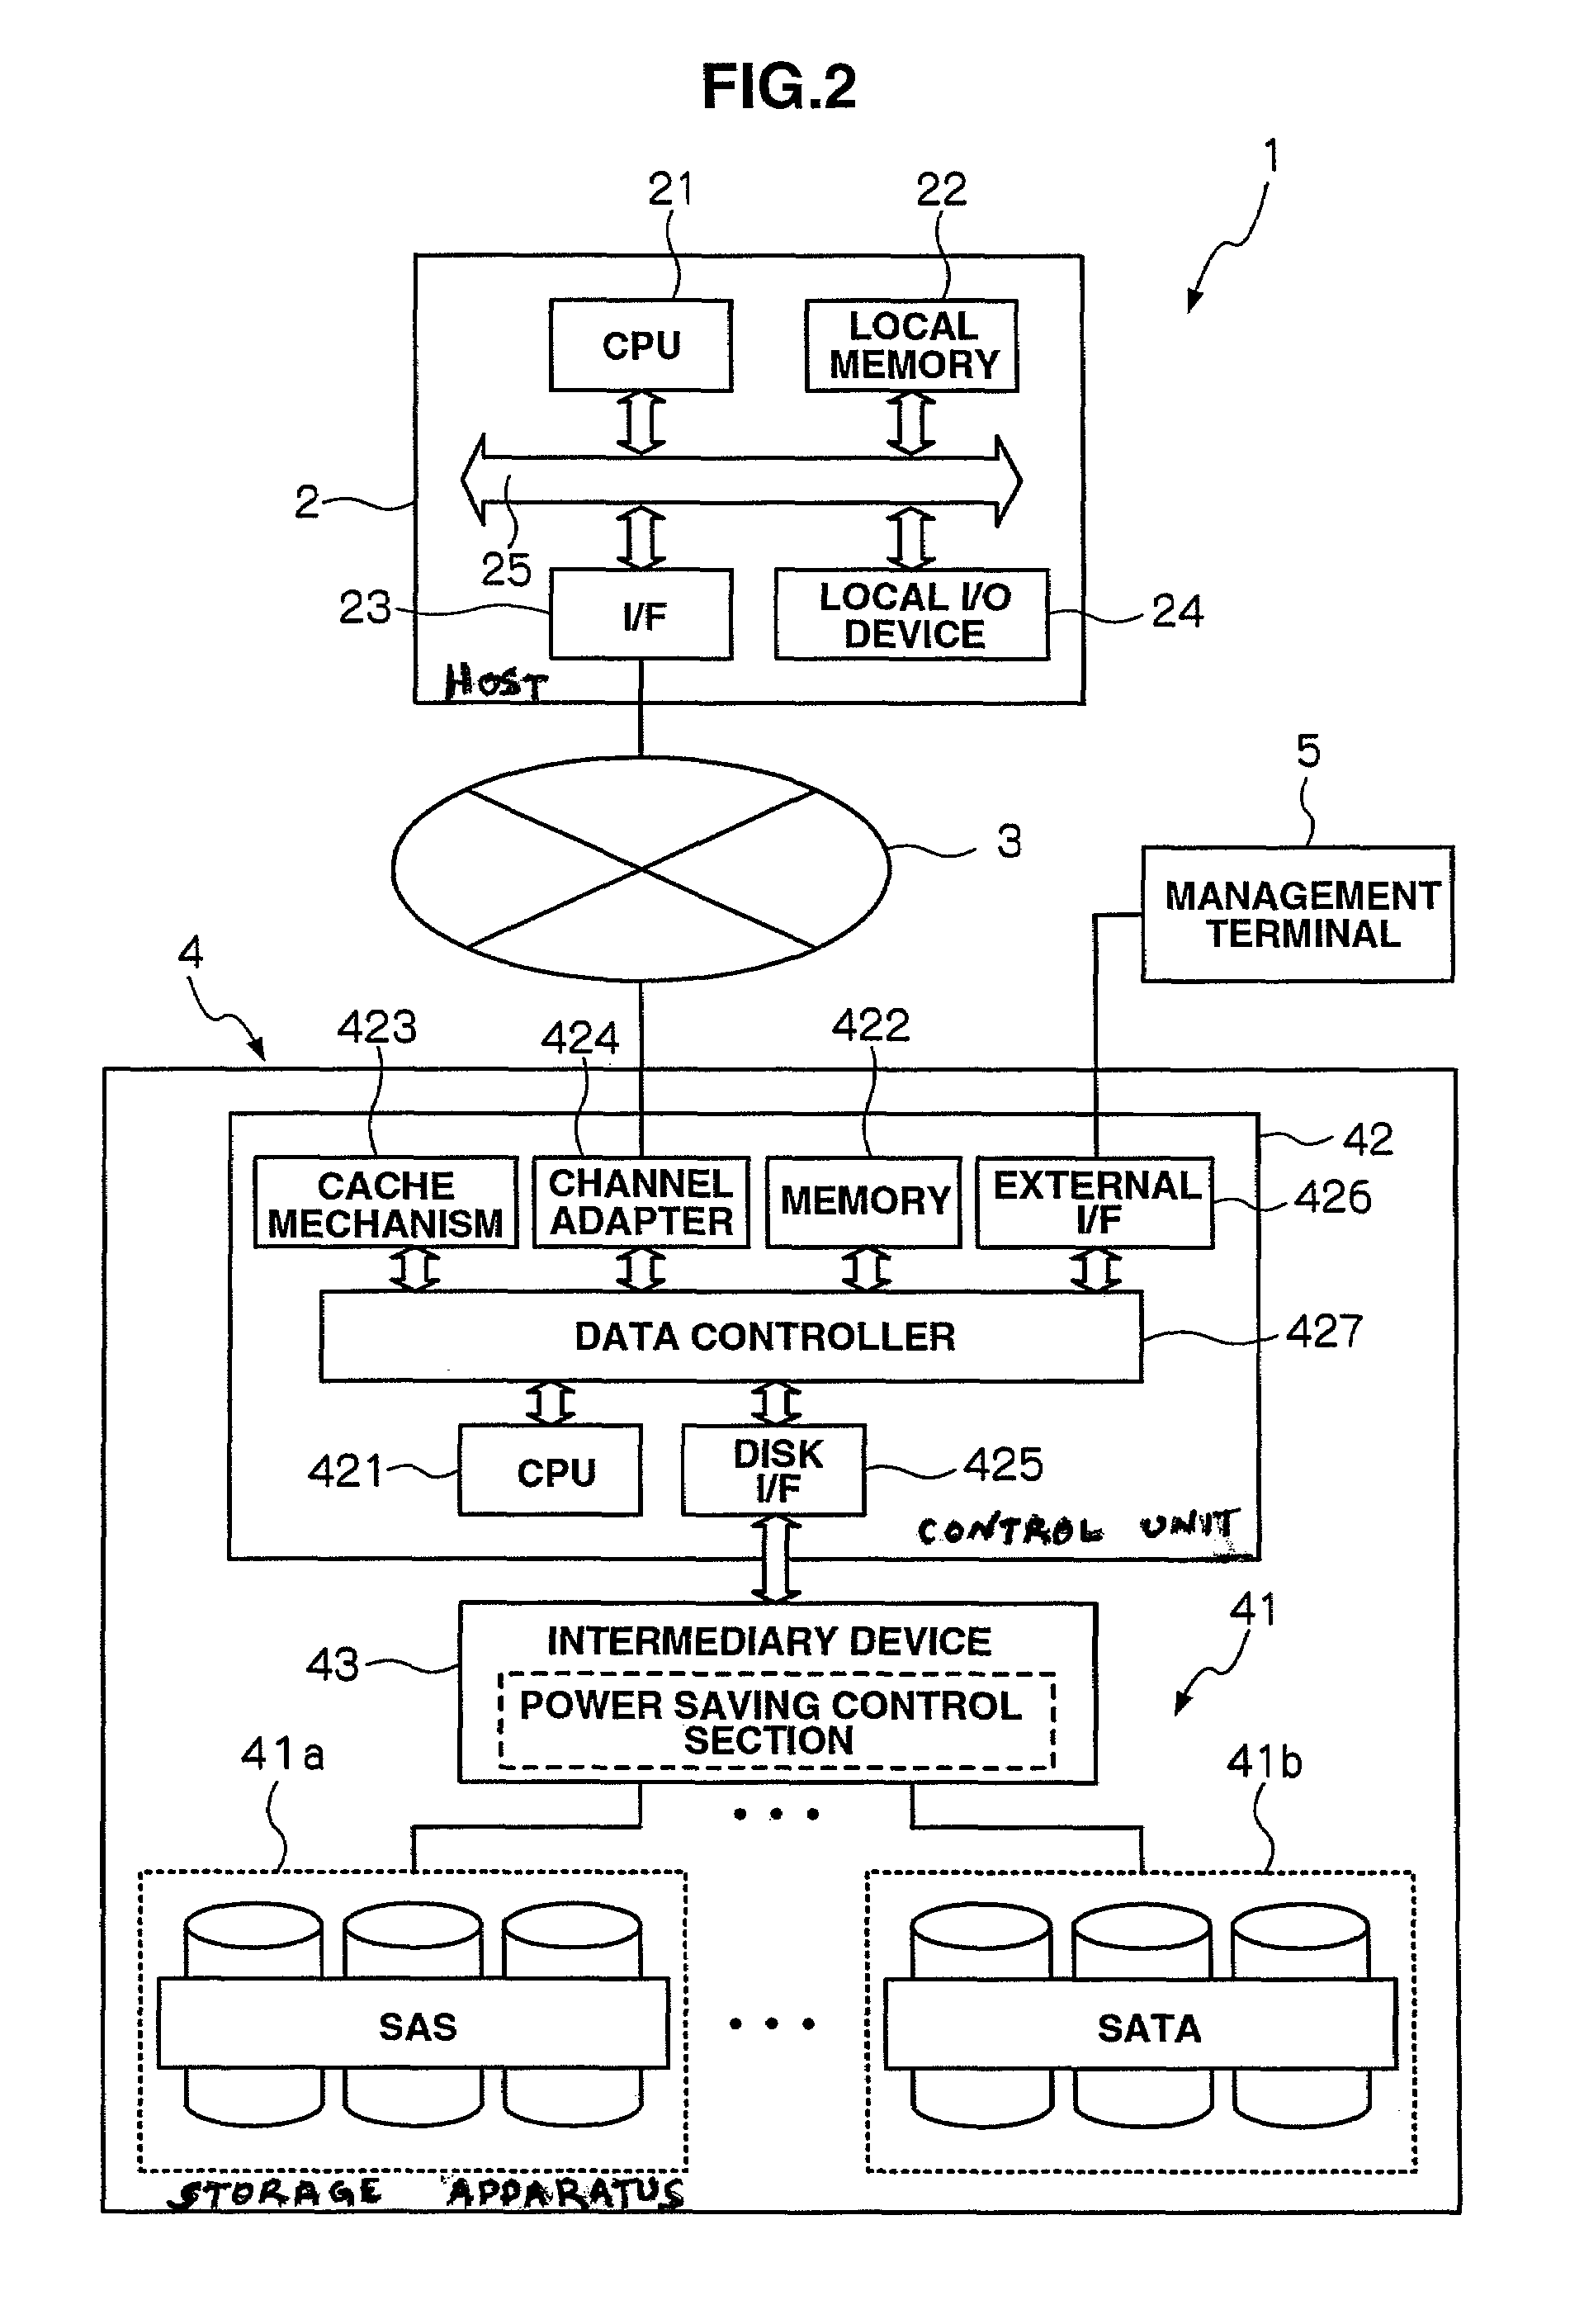 Storage apparatus for controlling power saving modes of multiple disk devices of different specifications